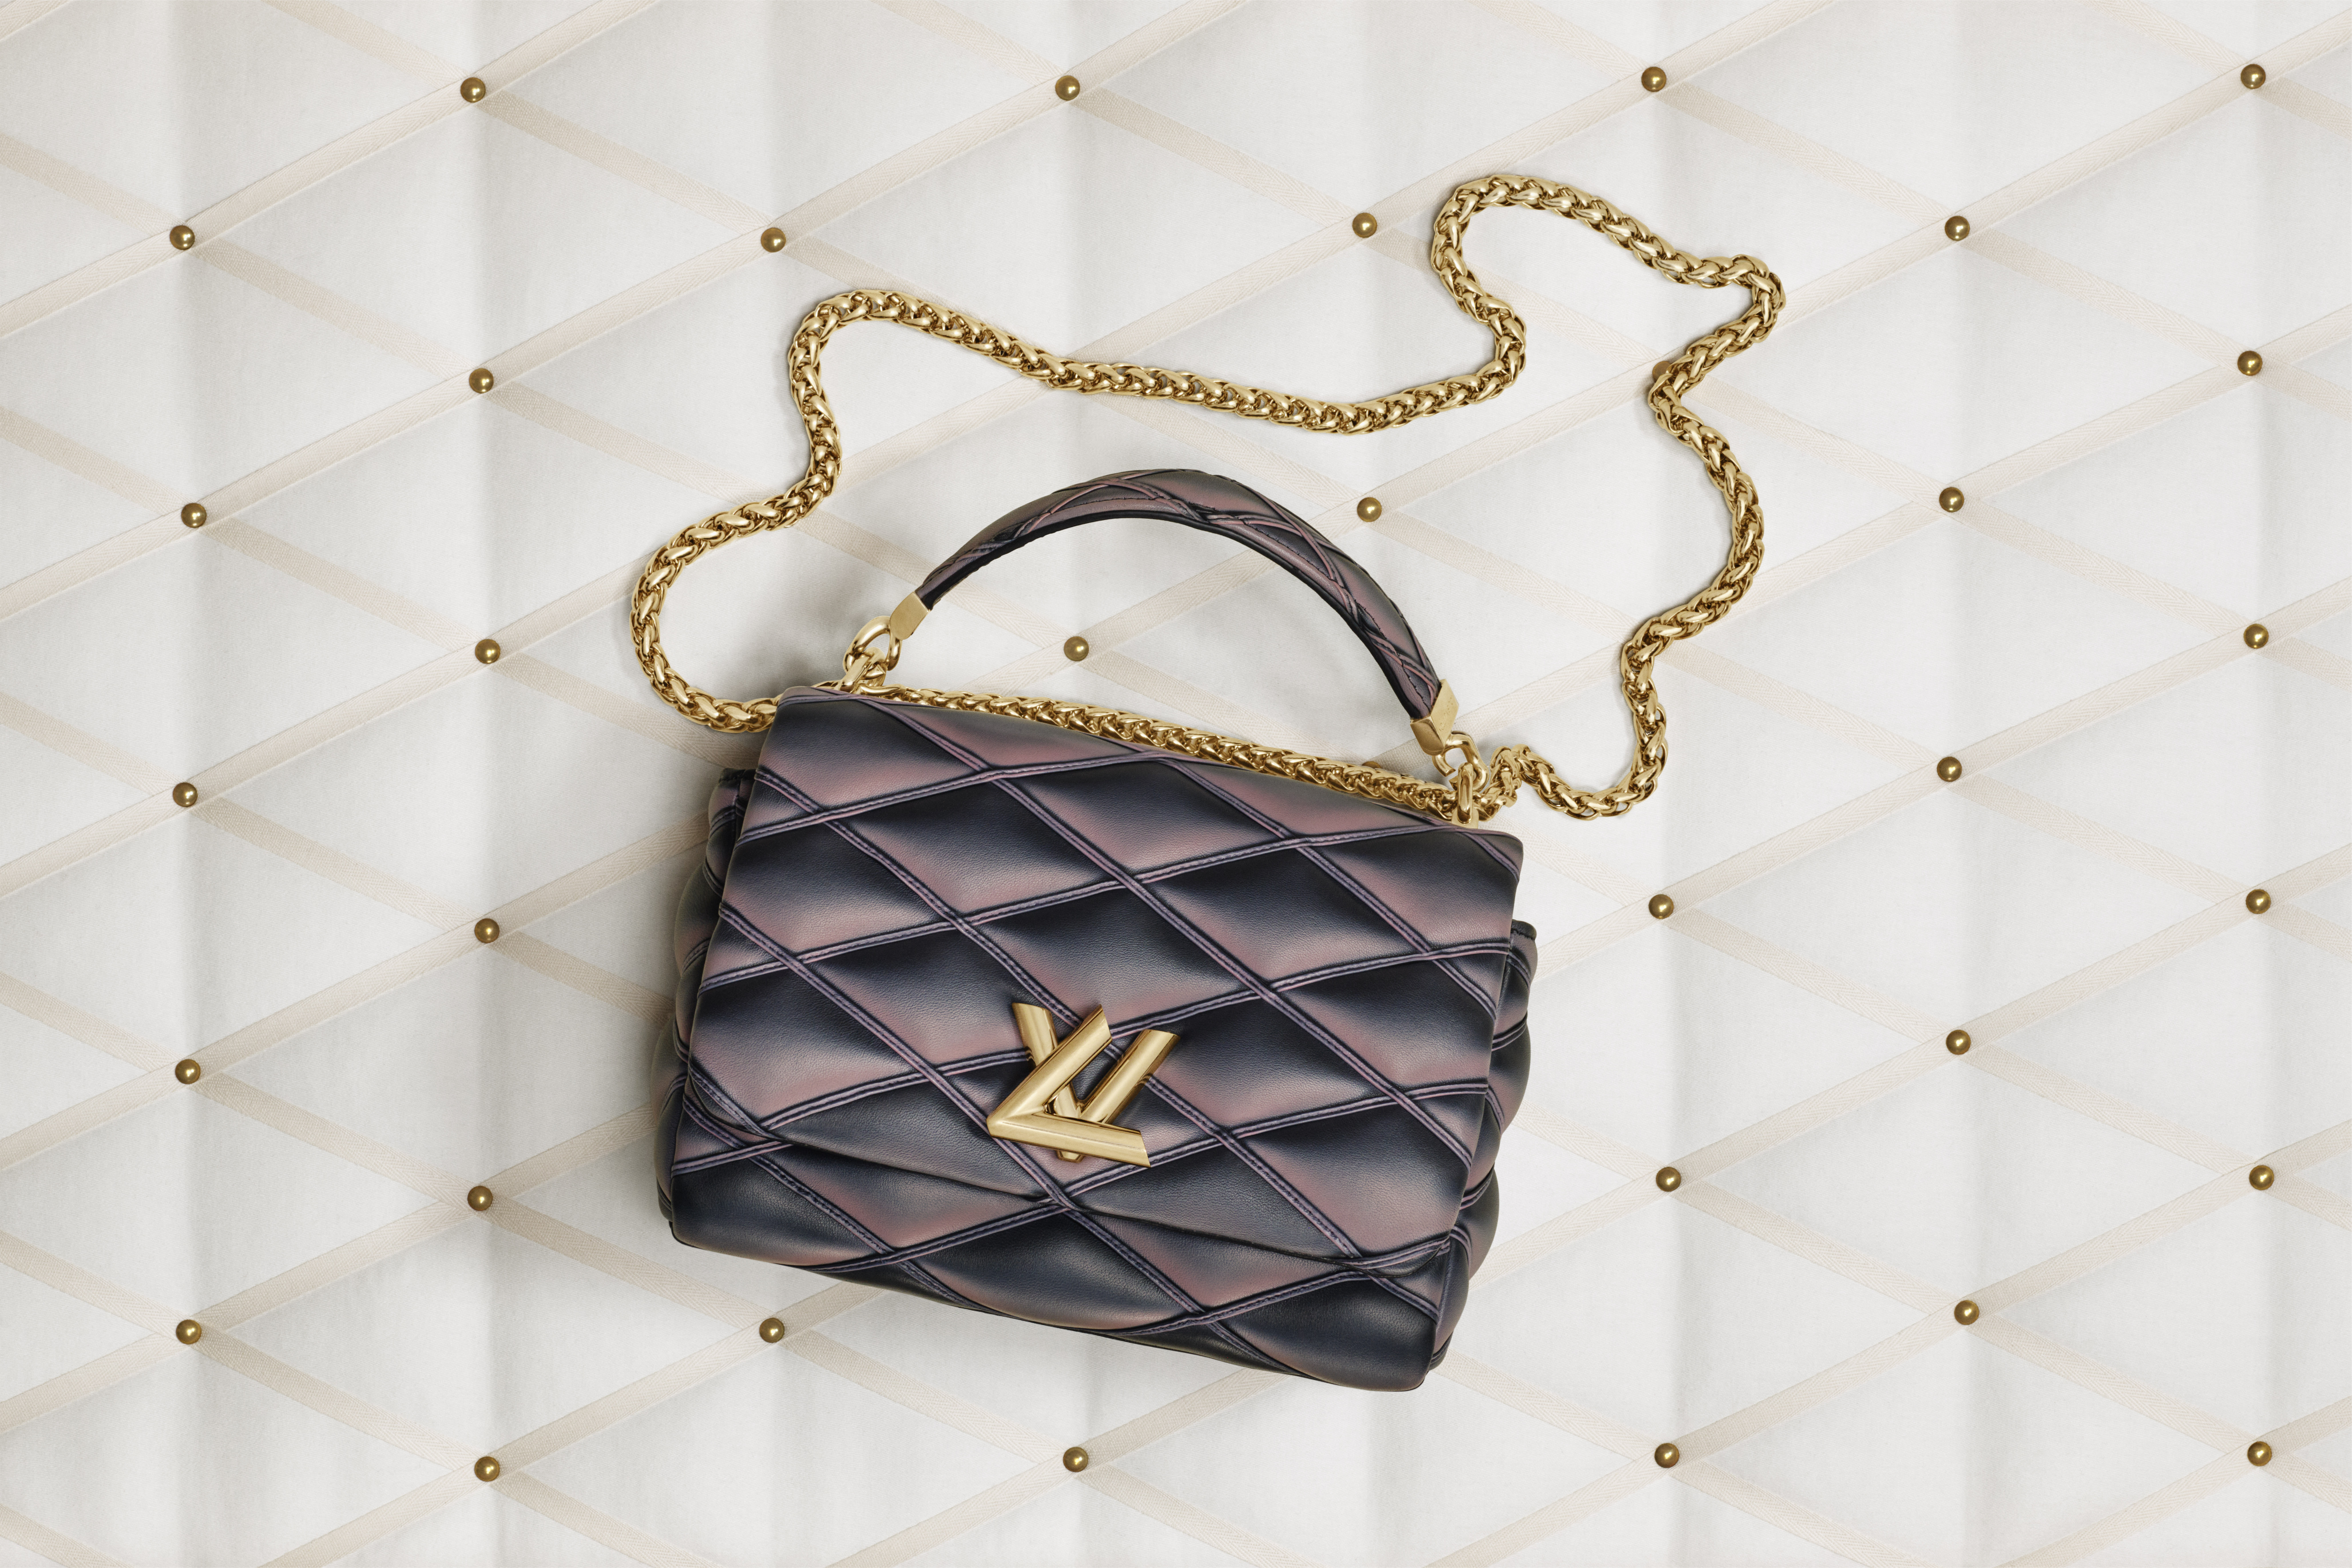 Your first look at the new Louis Vuitton GO-14 bag